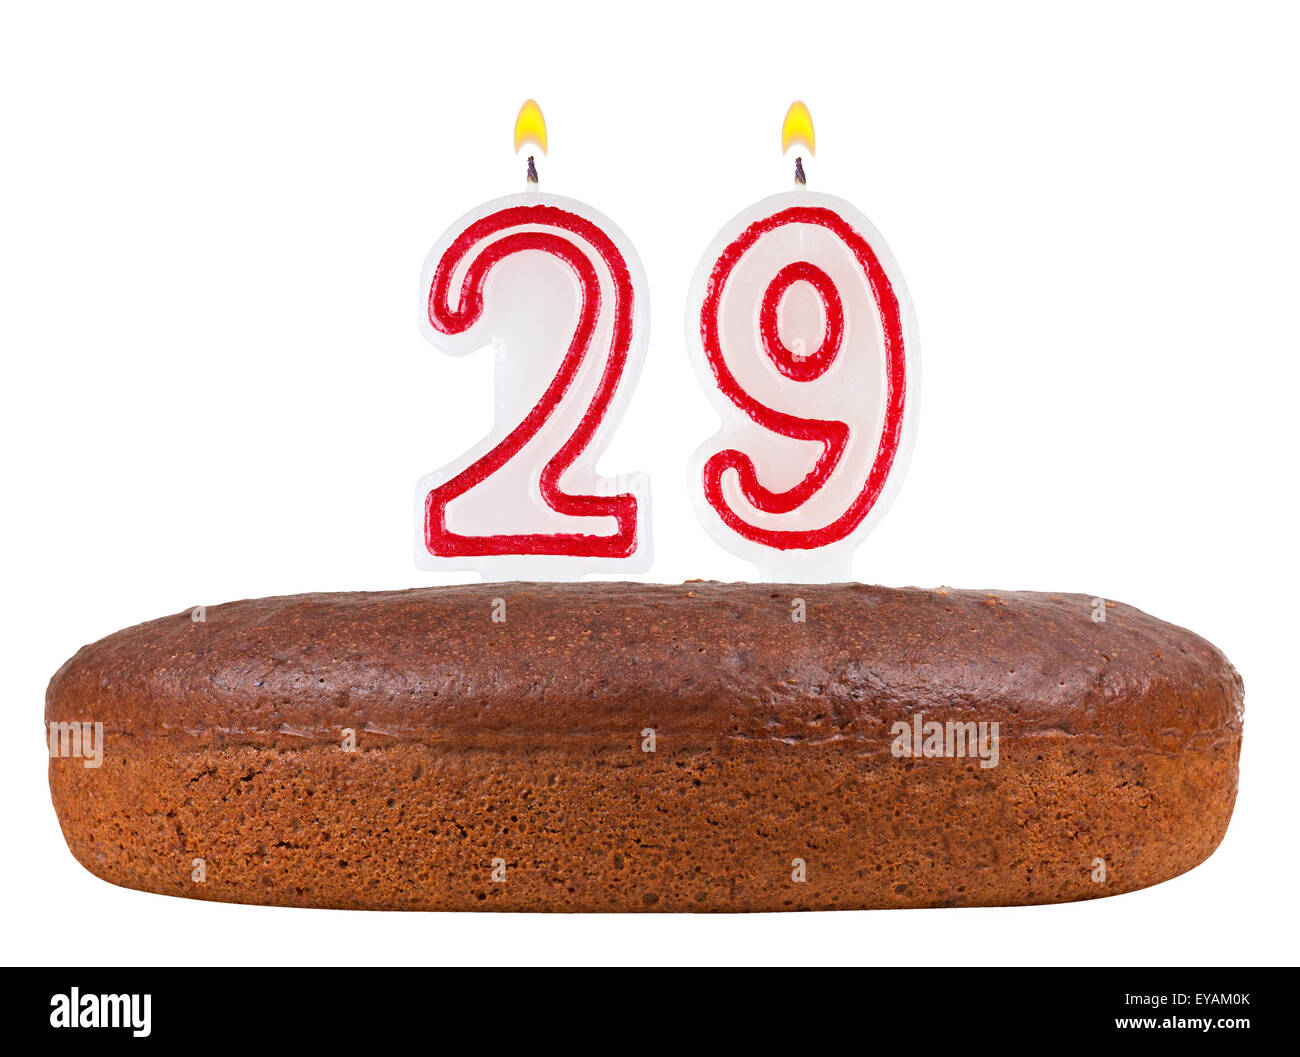 birthday cake with candles number 29 isolated on white background Stock Photo